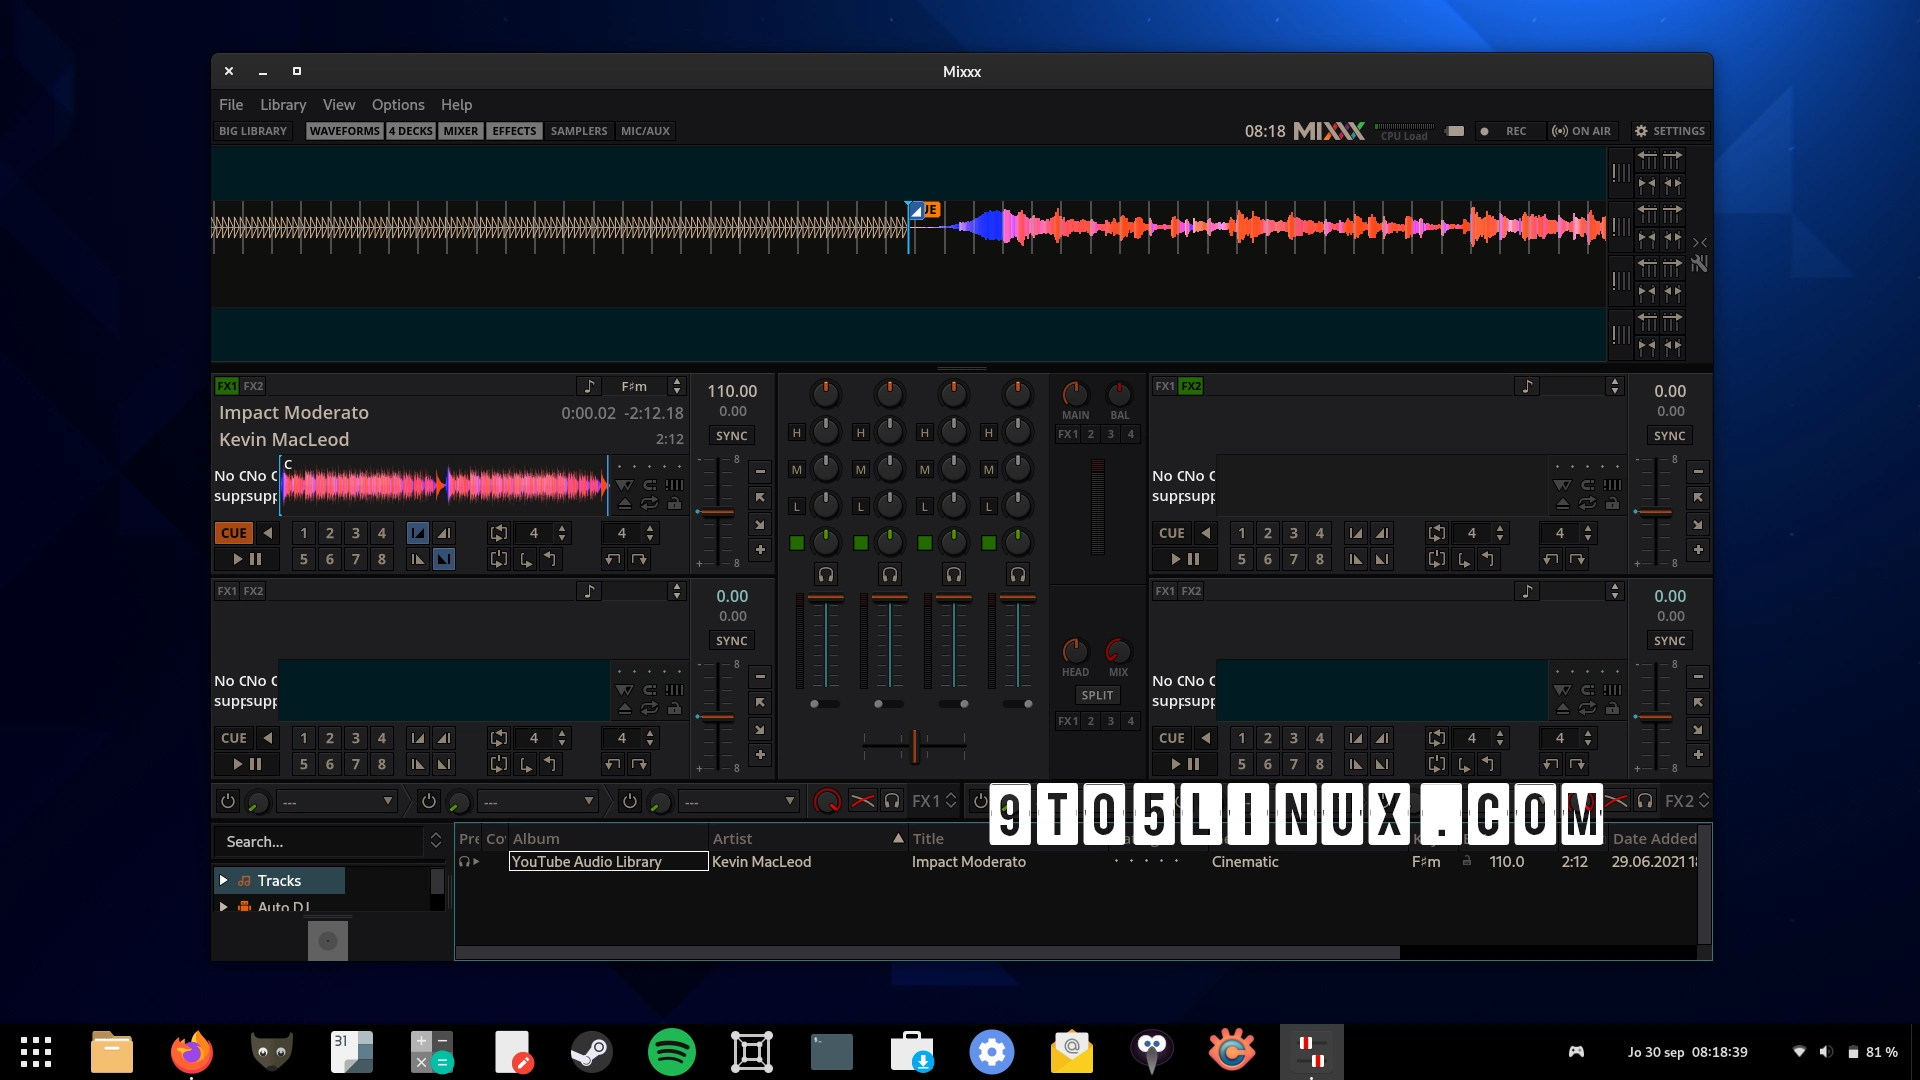 Mixxx 2.3.1 Free DJ Software Adds Support for New Controllers, Improves HiDPI Support